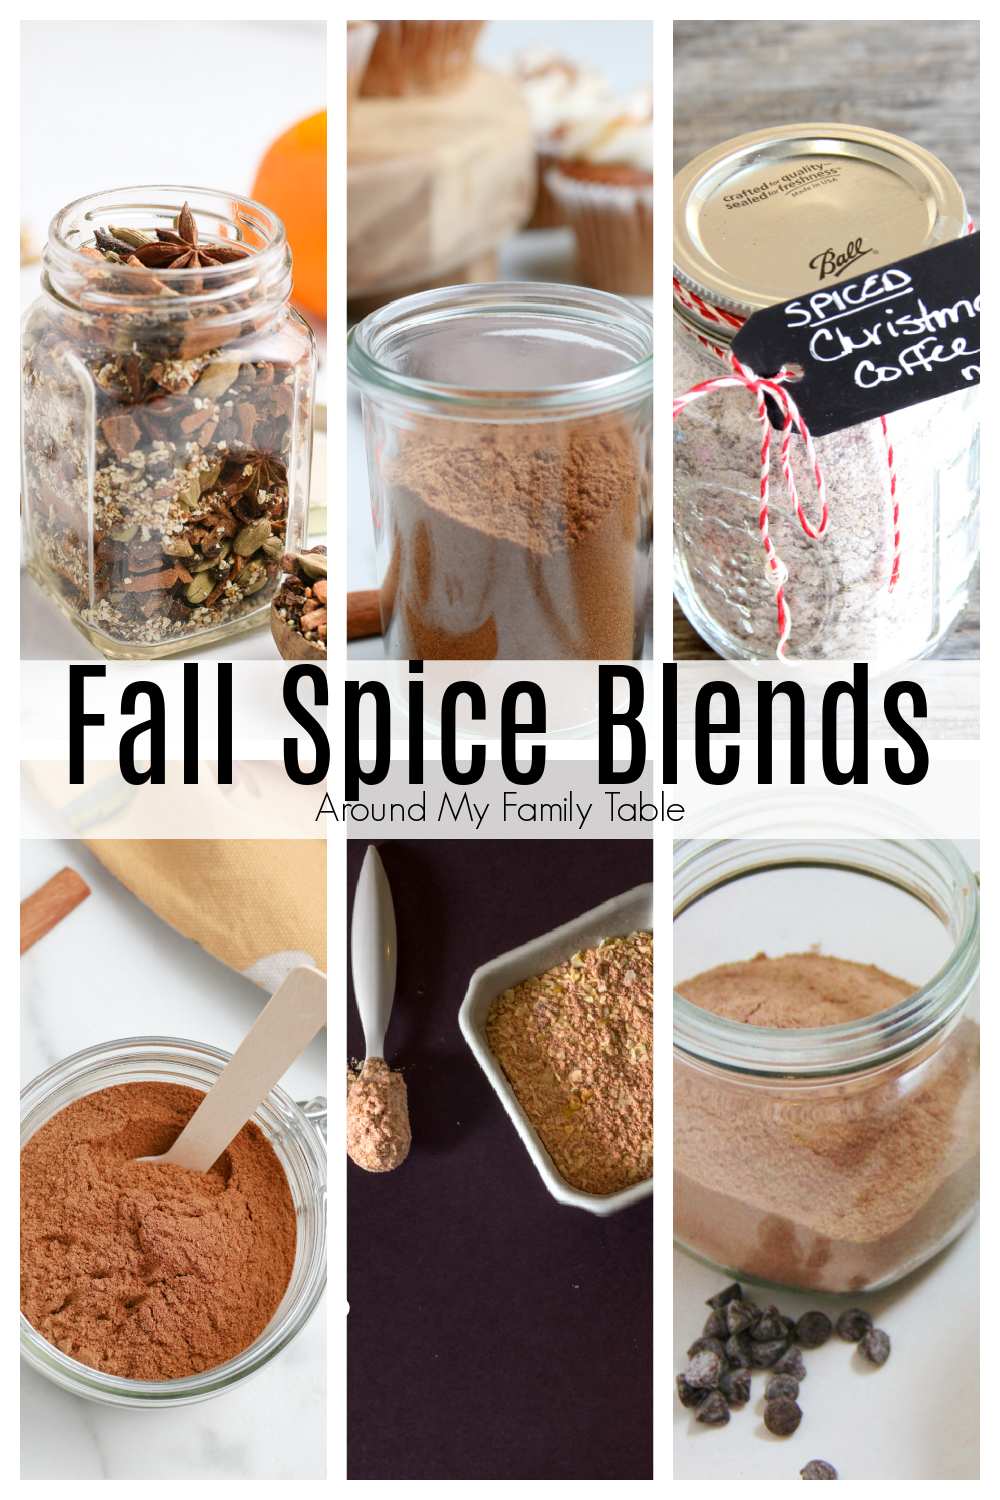 Homemade Fall Spice Blends include everything from classic hot cocoa to chili mix to pumpkin pie spice. Making your own blends means you can be creative and use the ingredients you love. via @slingmama